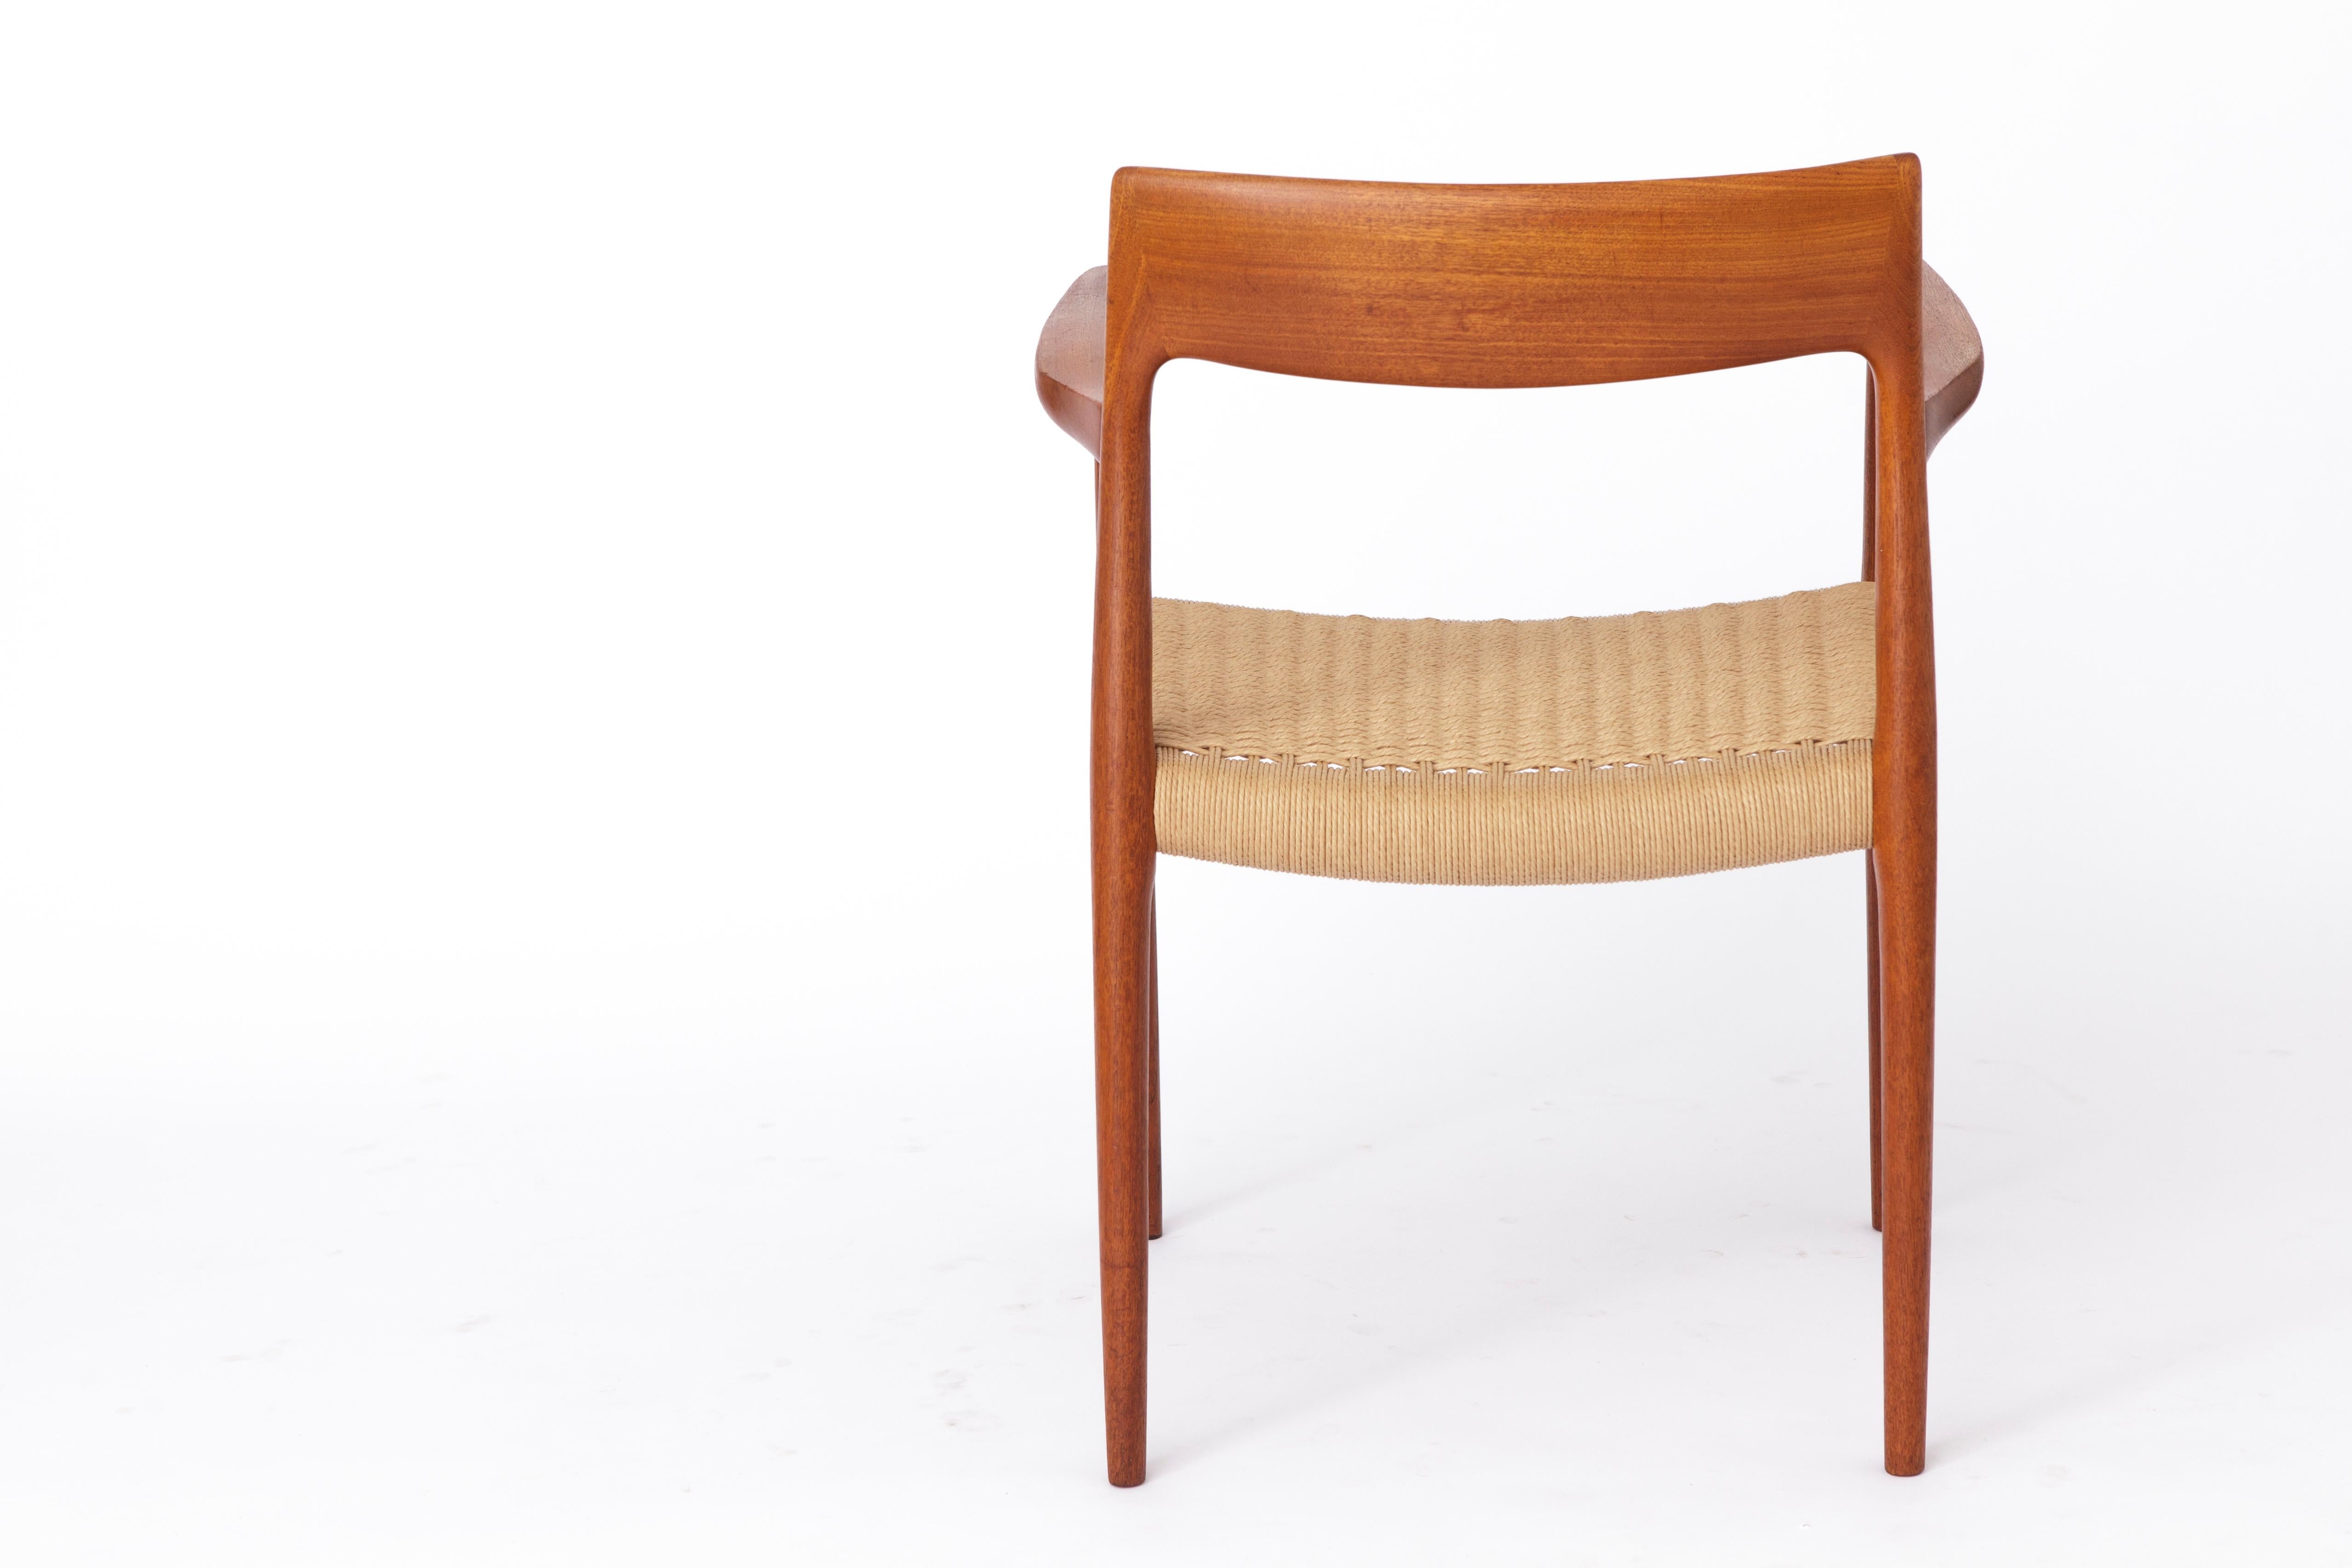 Teak Niels Moller armchair, model 57, 1950s Vintage, paper cord seat, dining chair For Sale